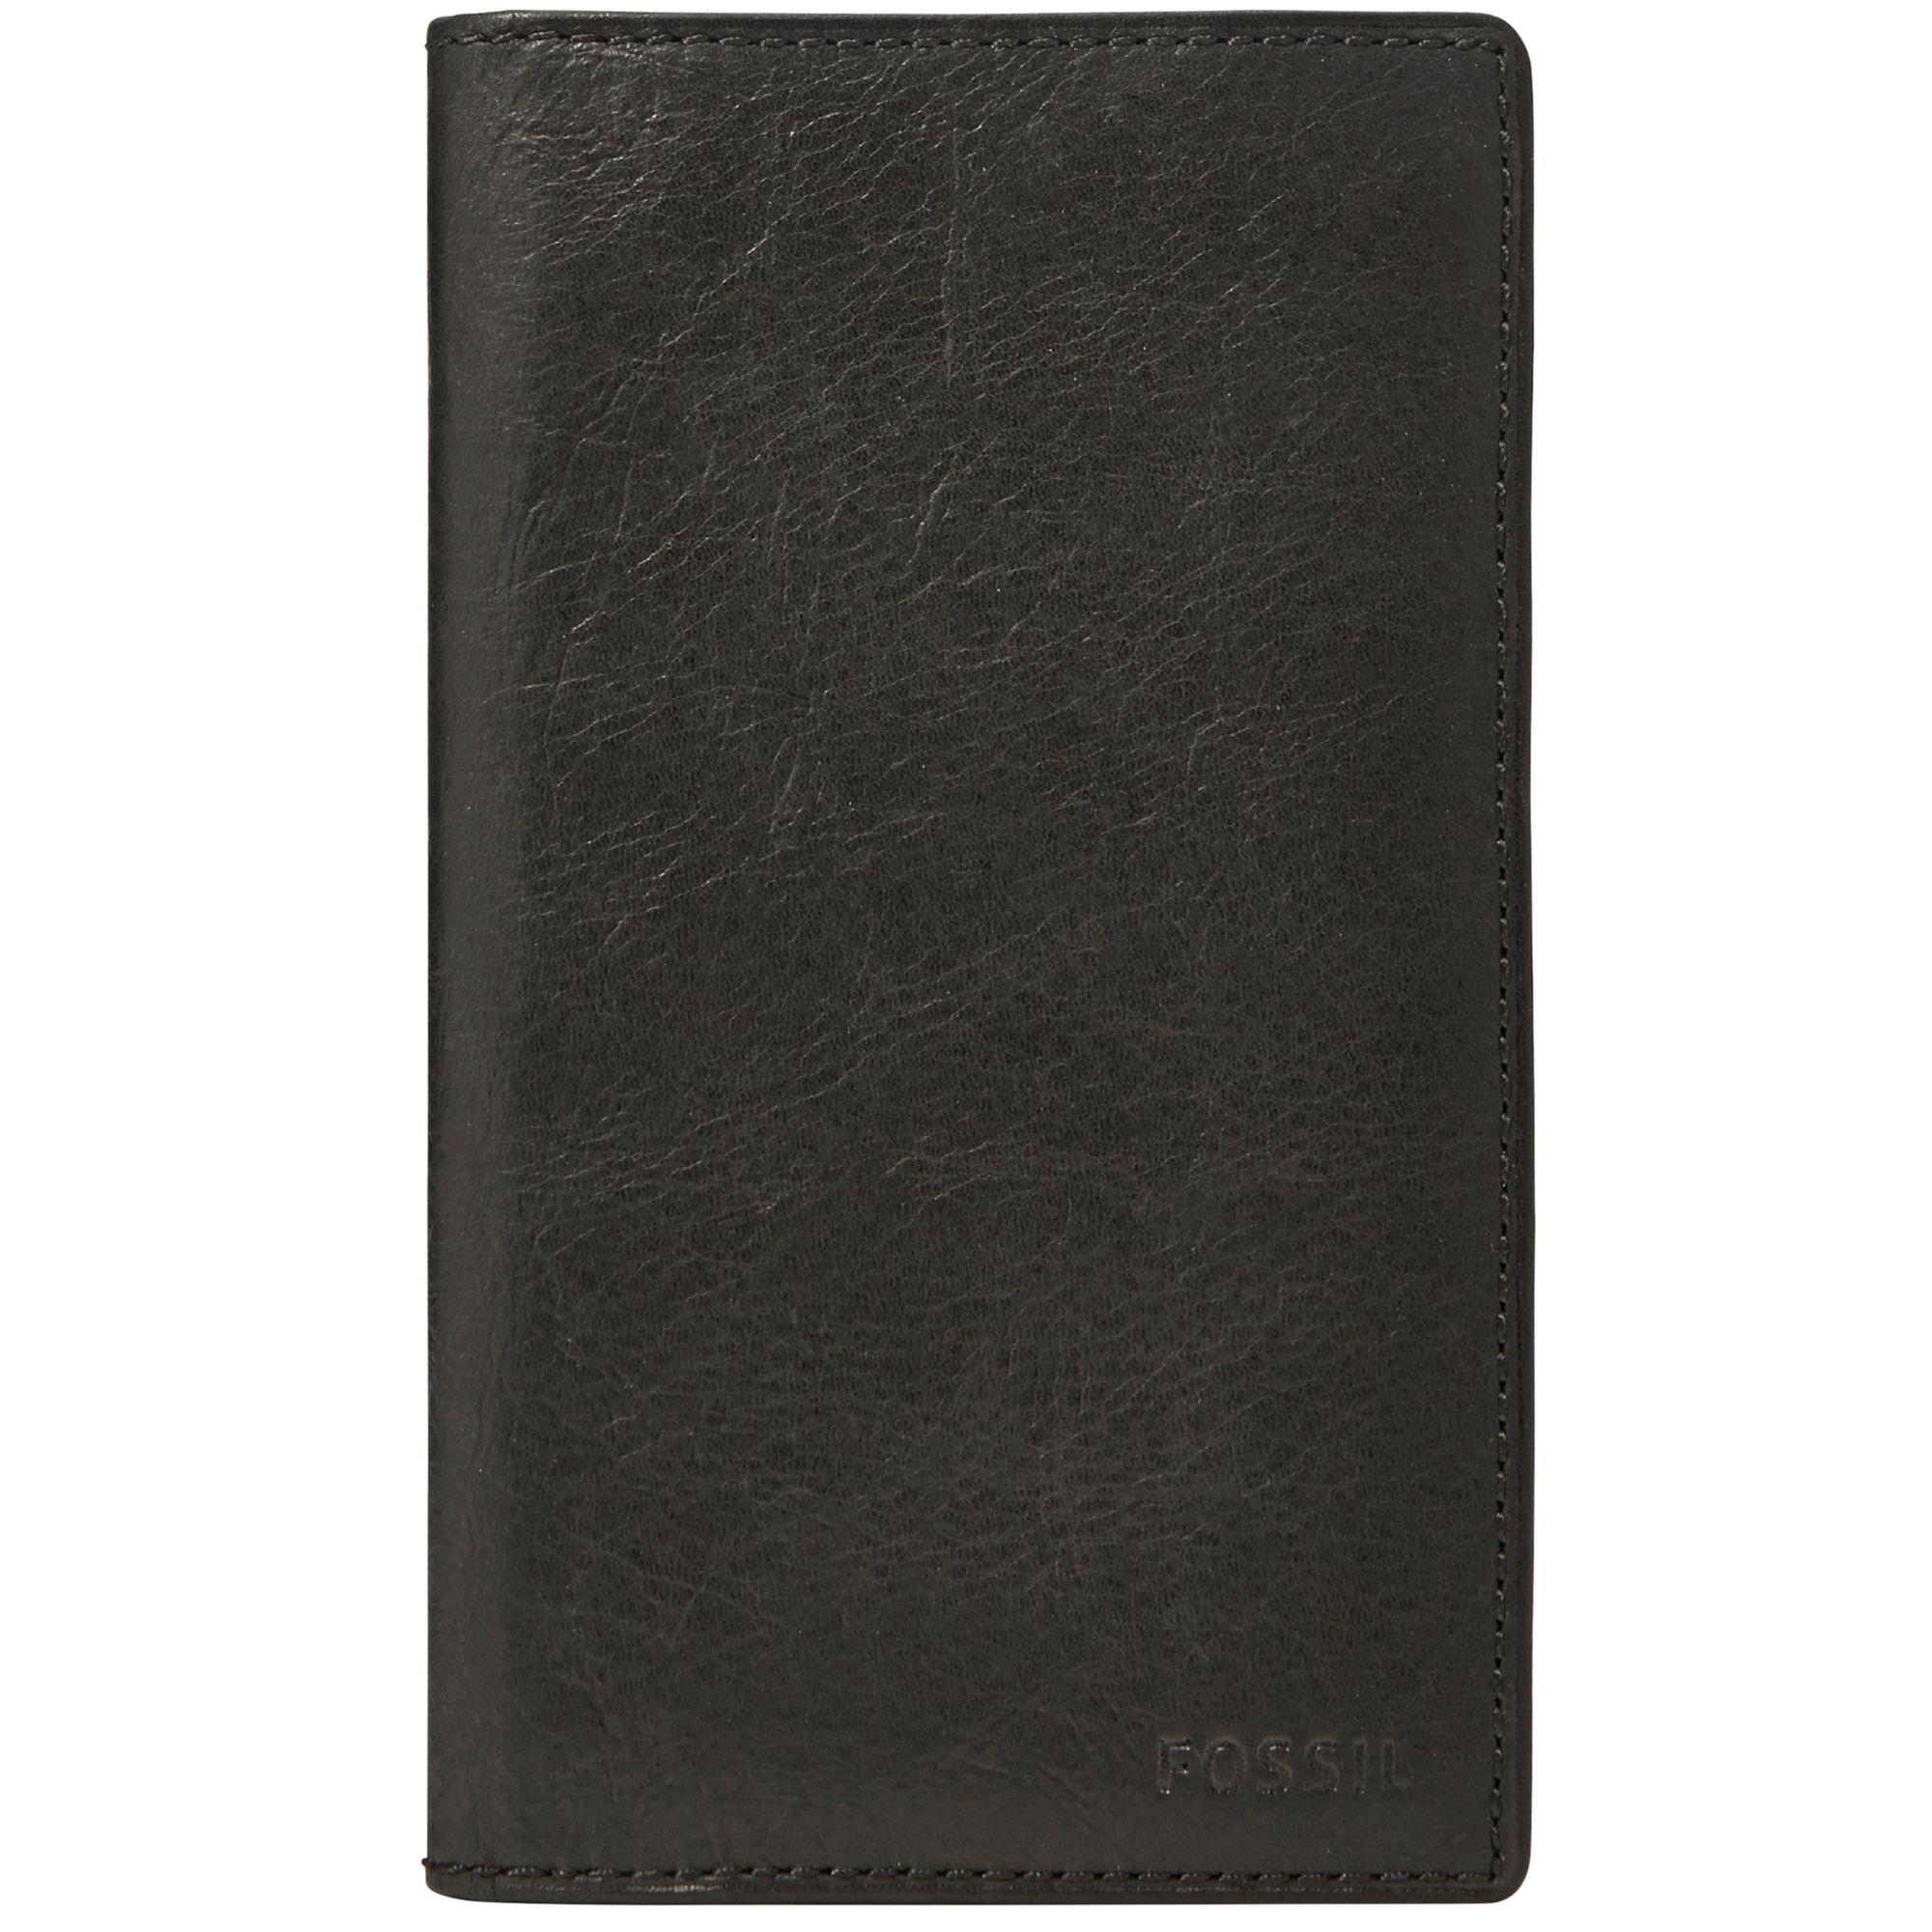 Fossil Ingram Executive Checkbook Leather Wallet in Black for Men | Lyst